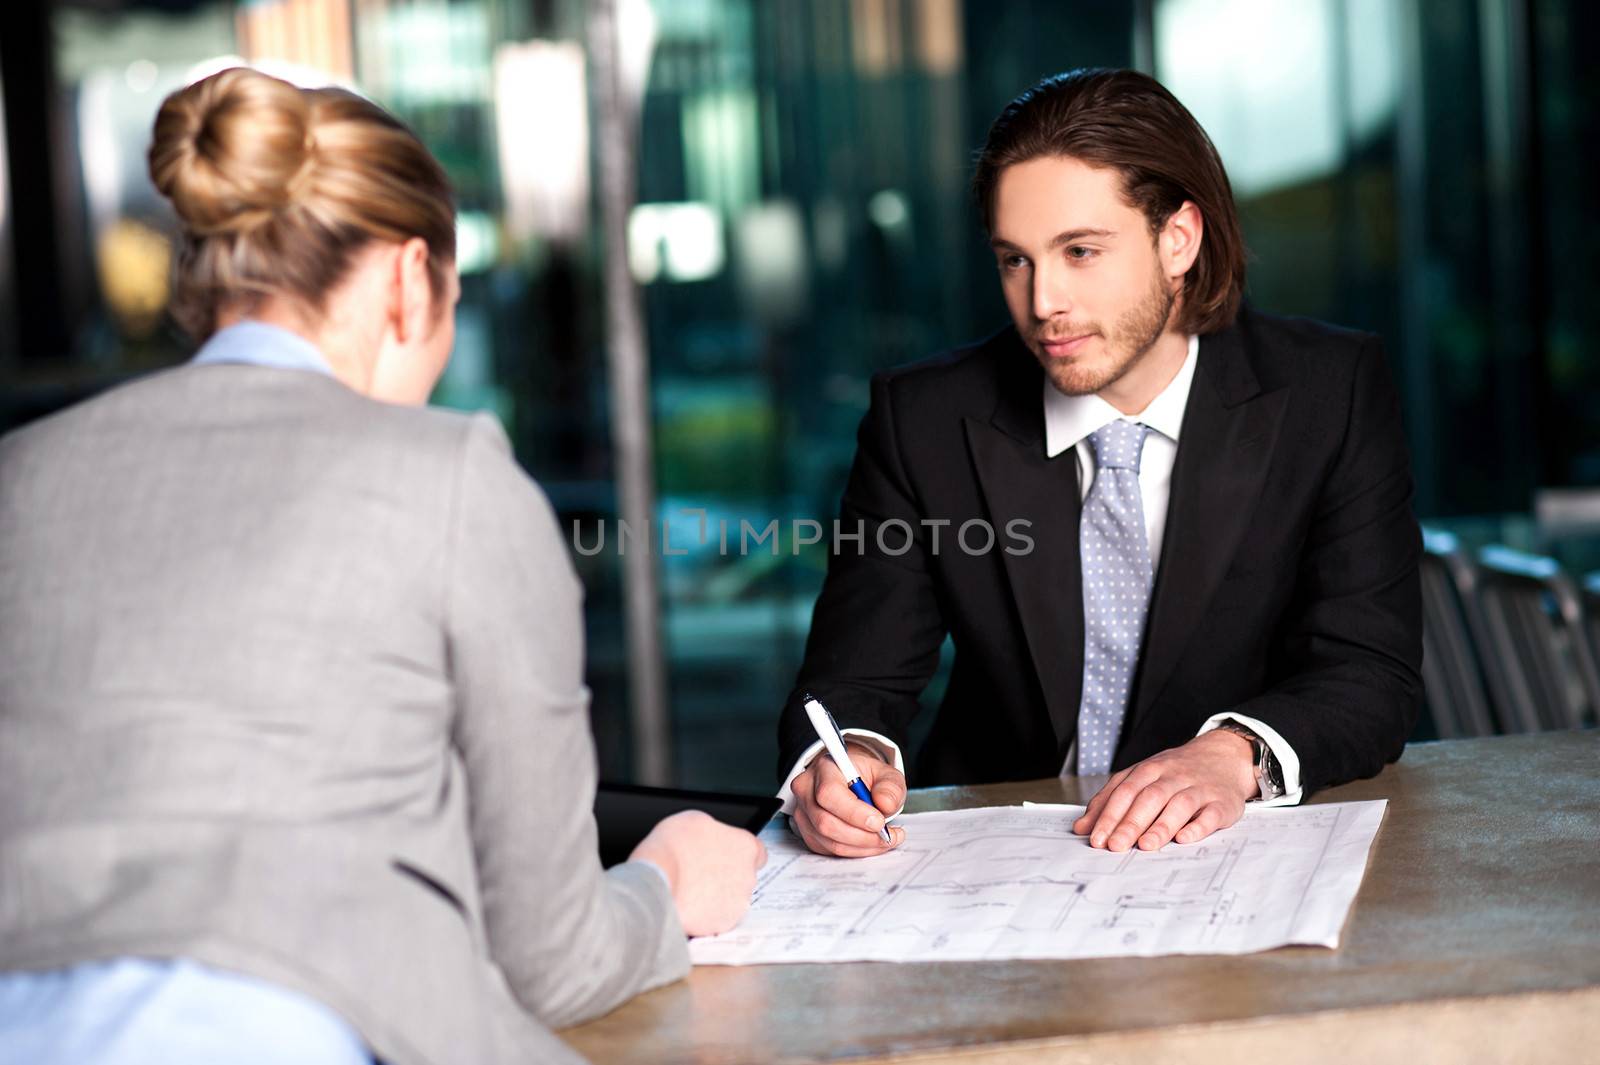 Colleagues discussing business plan by stockyimages